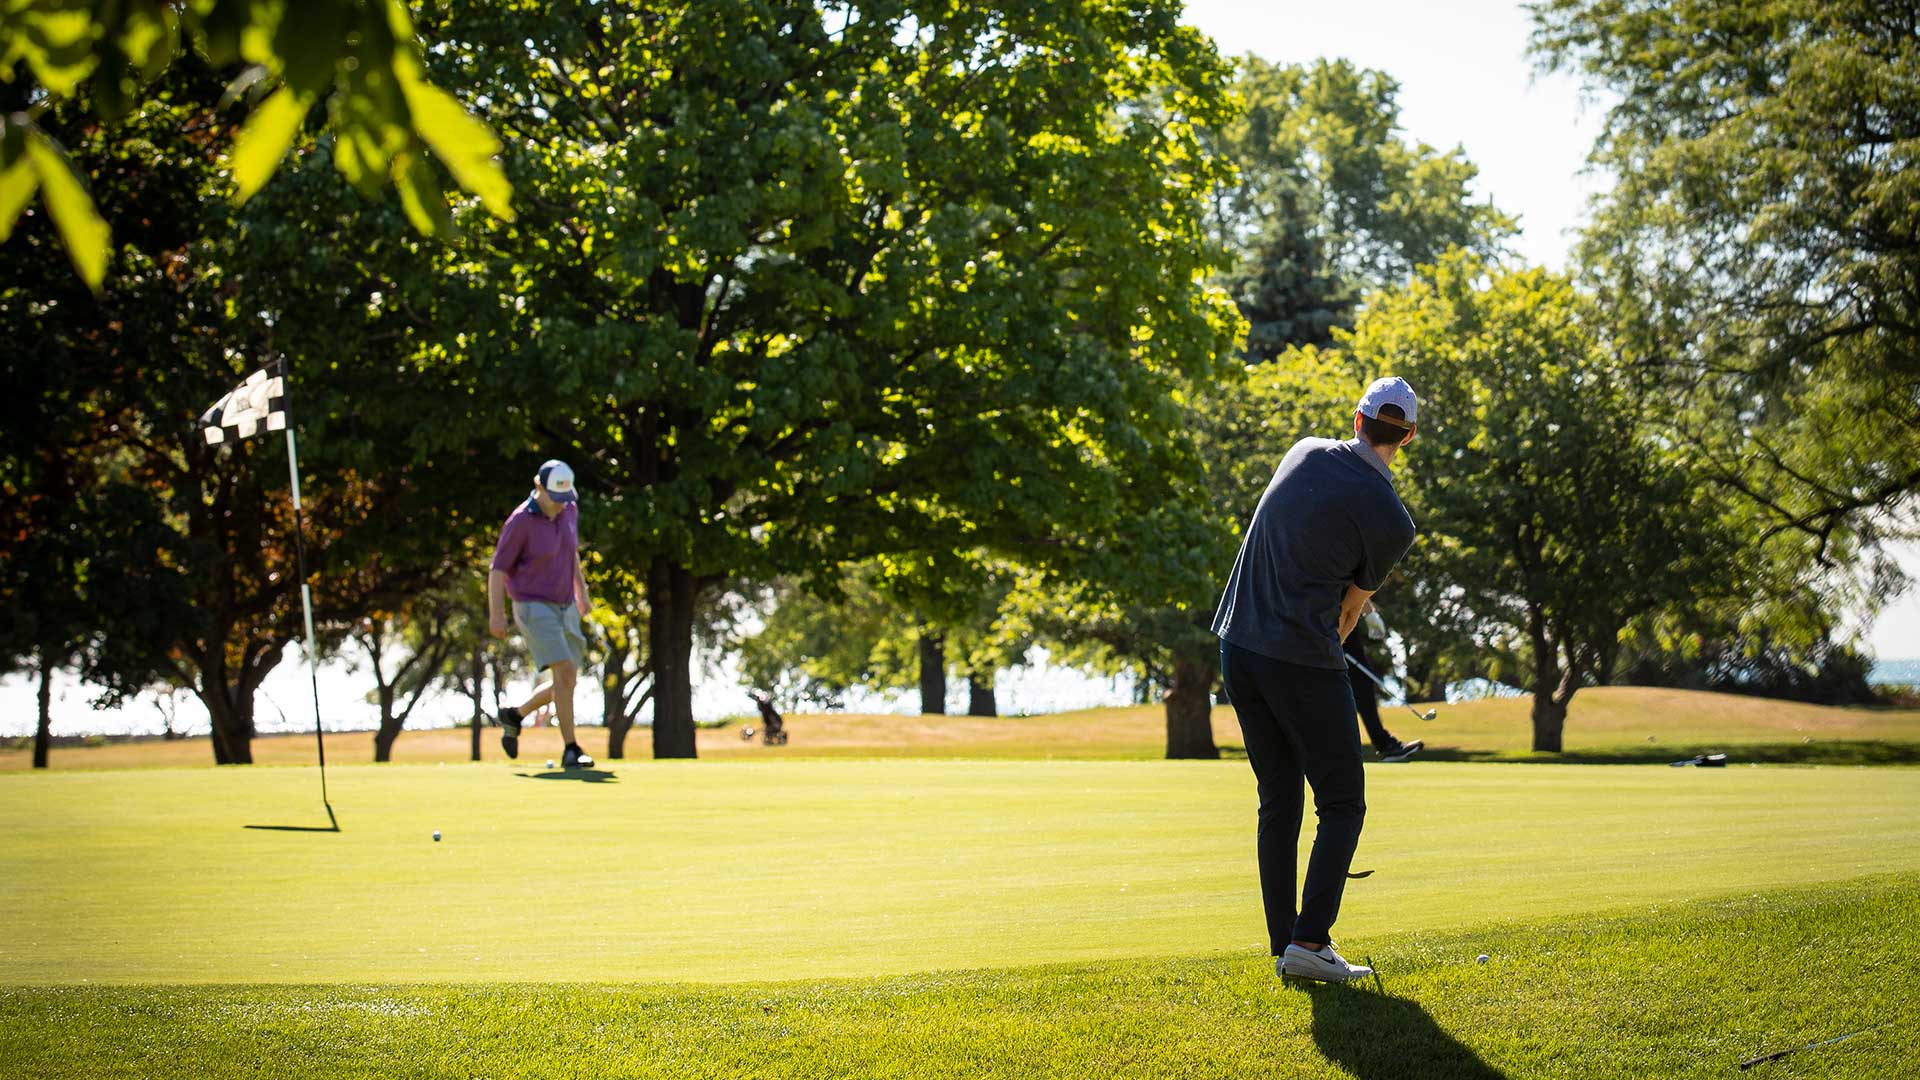 A man chips his golf ball from the fringe onto the green. His friend walks near the pin in the background.